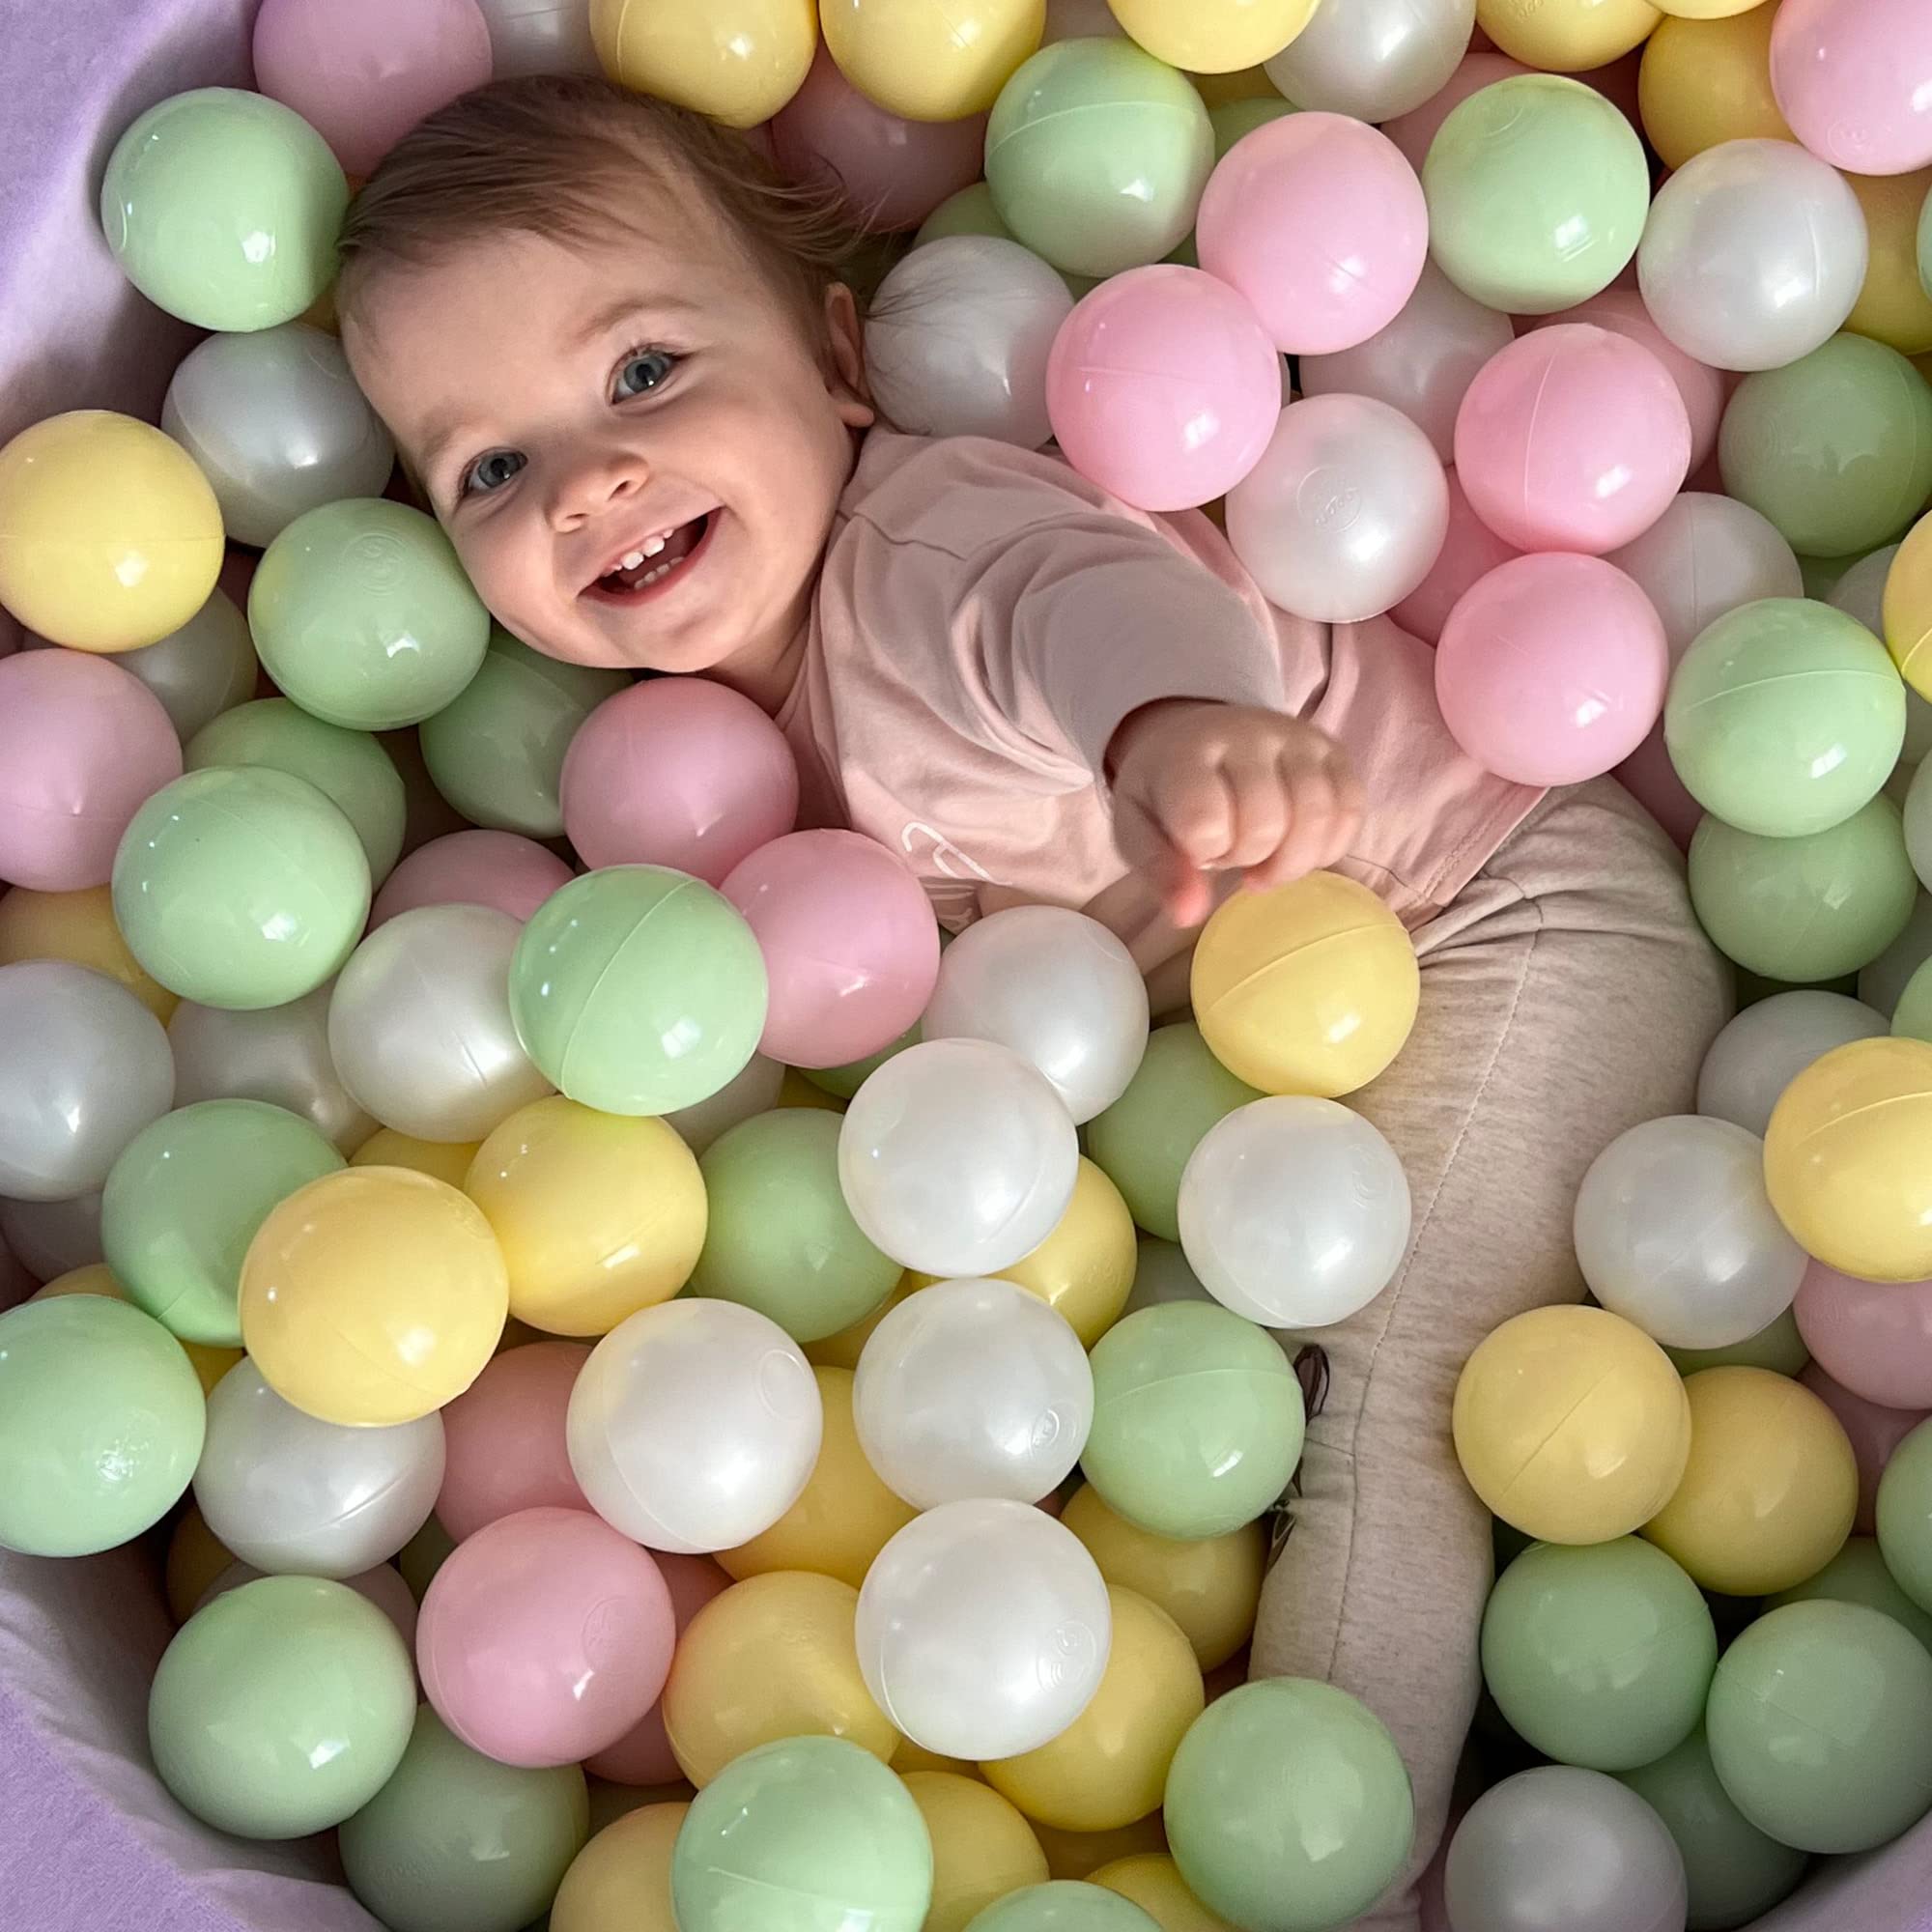 MEOWBABY Foam Ball Pit 35 x 11.5 in /200 Balls Included ∅ 2.75in Round Ball Pit for Baby Kids Soft Children Toddler Playpen Made in EU Dark Grey: Grey/White/Light Pink